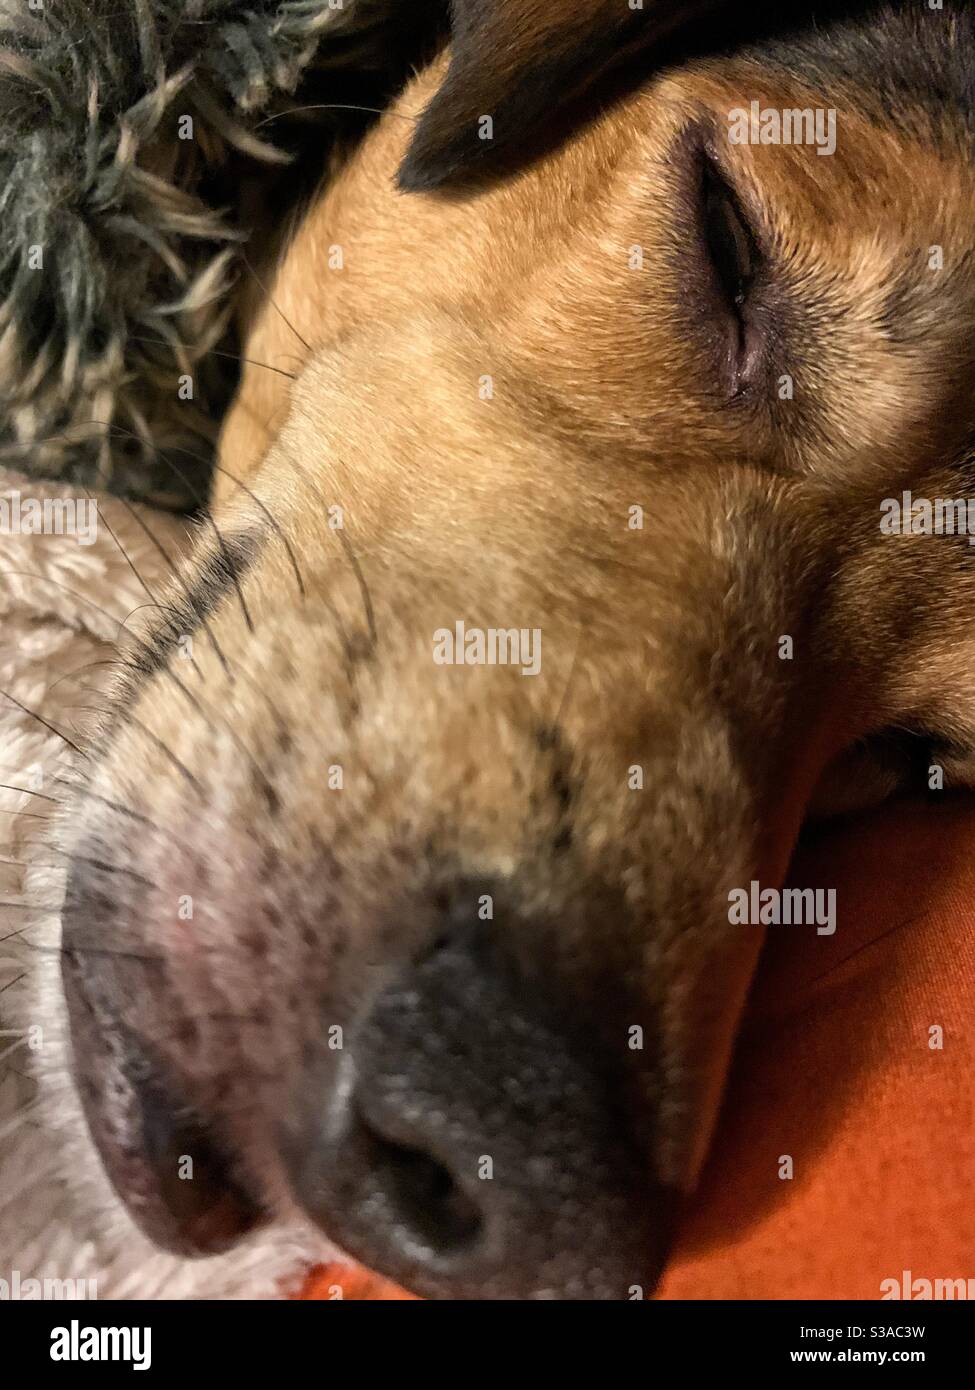 Closeup of the face of a sleeping brown dog. Stock Photo